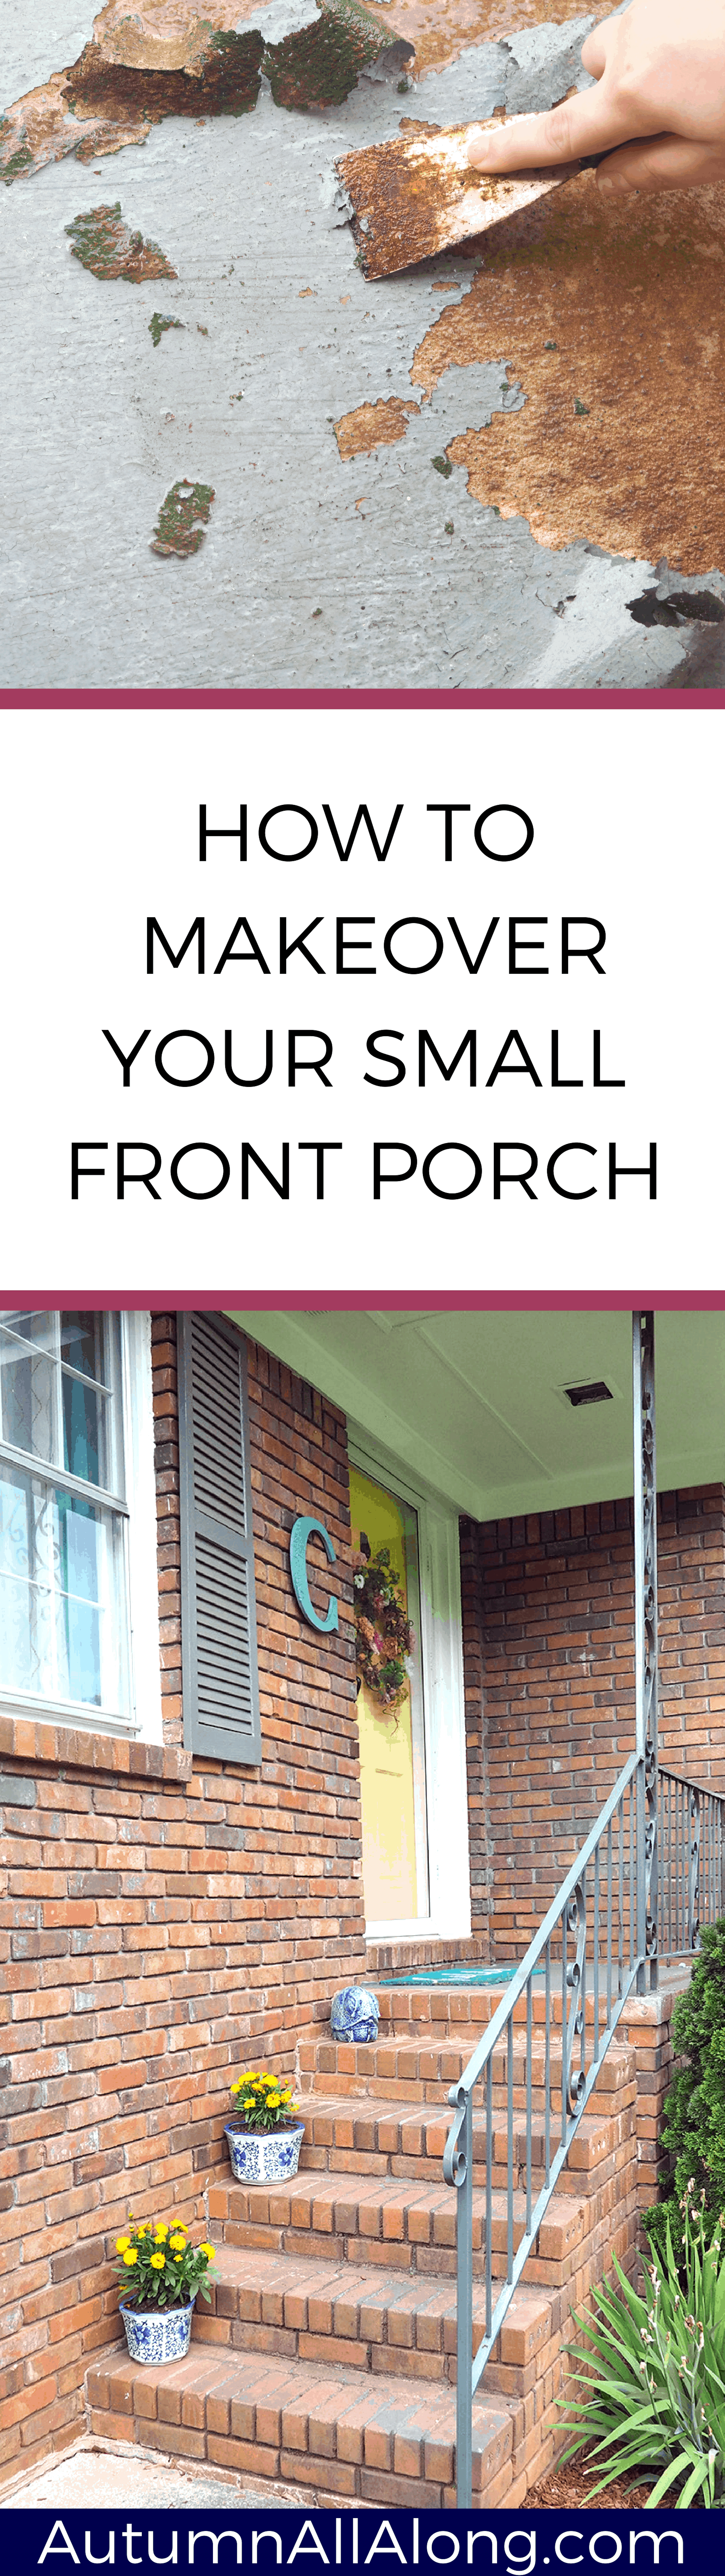 Step by step instructions on how to make over your small front porch | via Autumn All Along